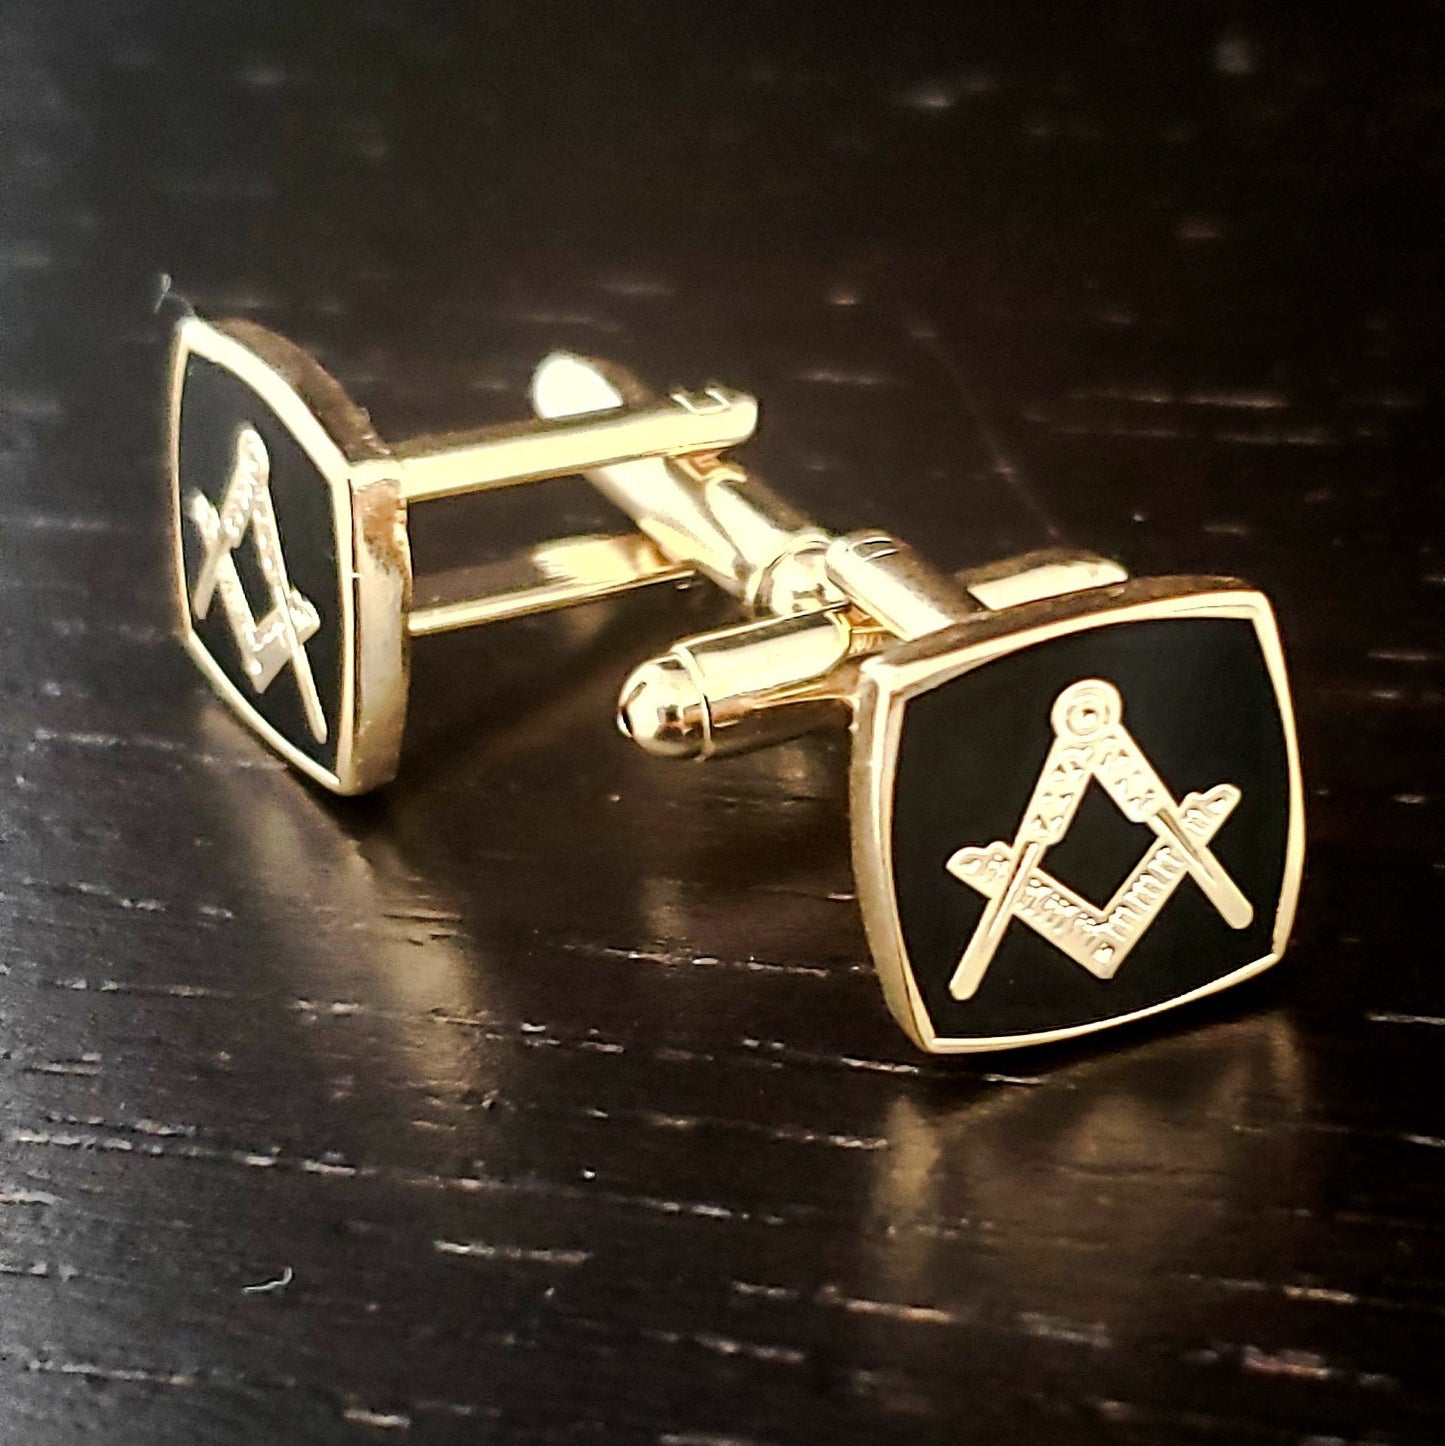 Square and Compass Cuff Links Cufflinks